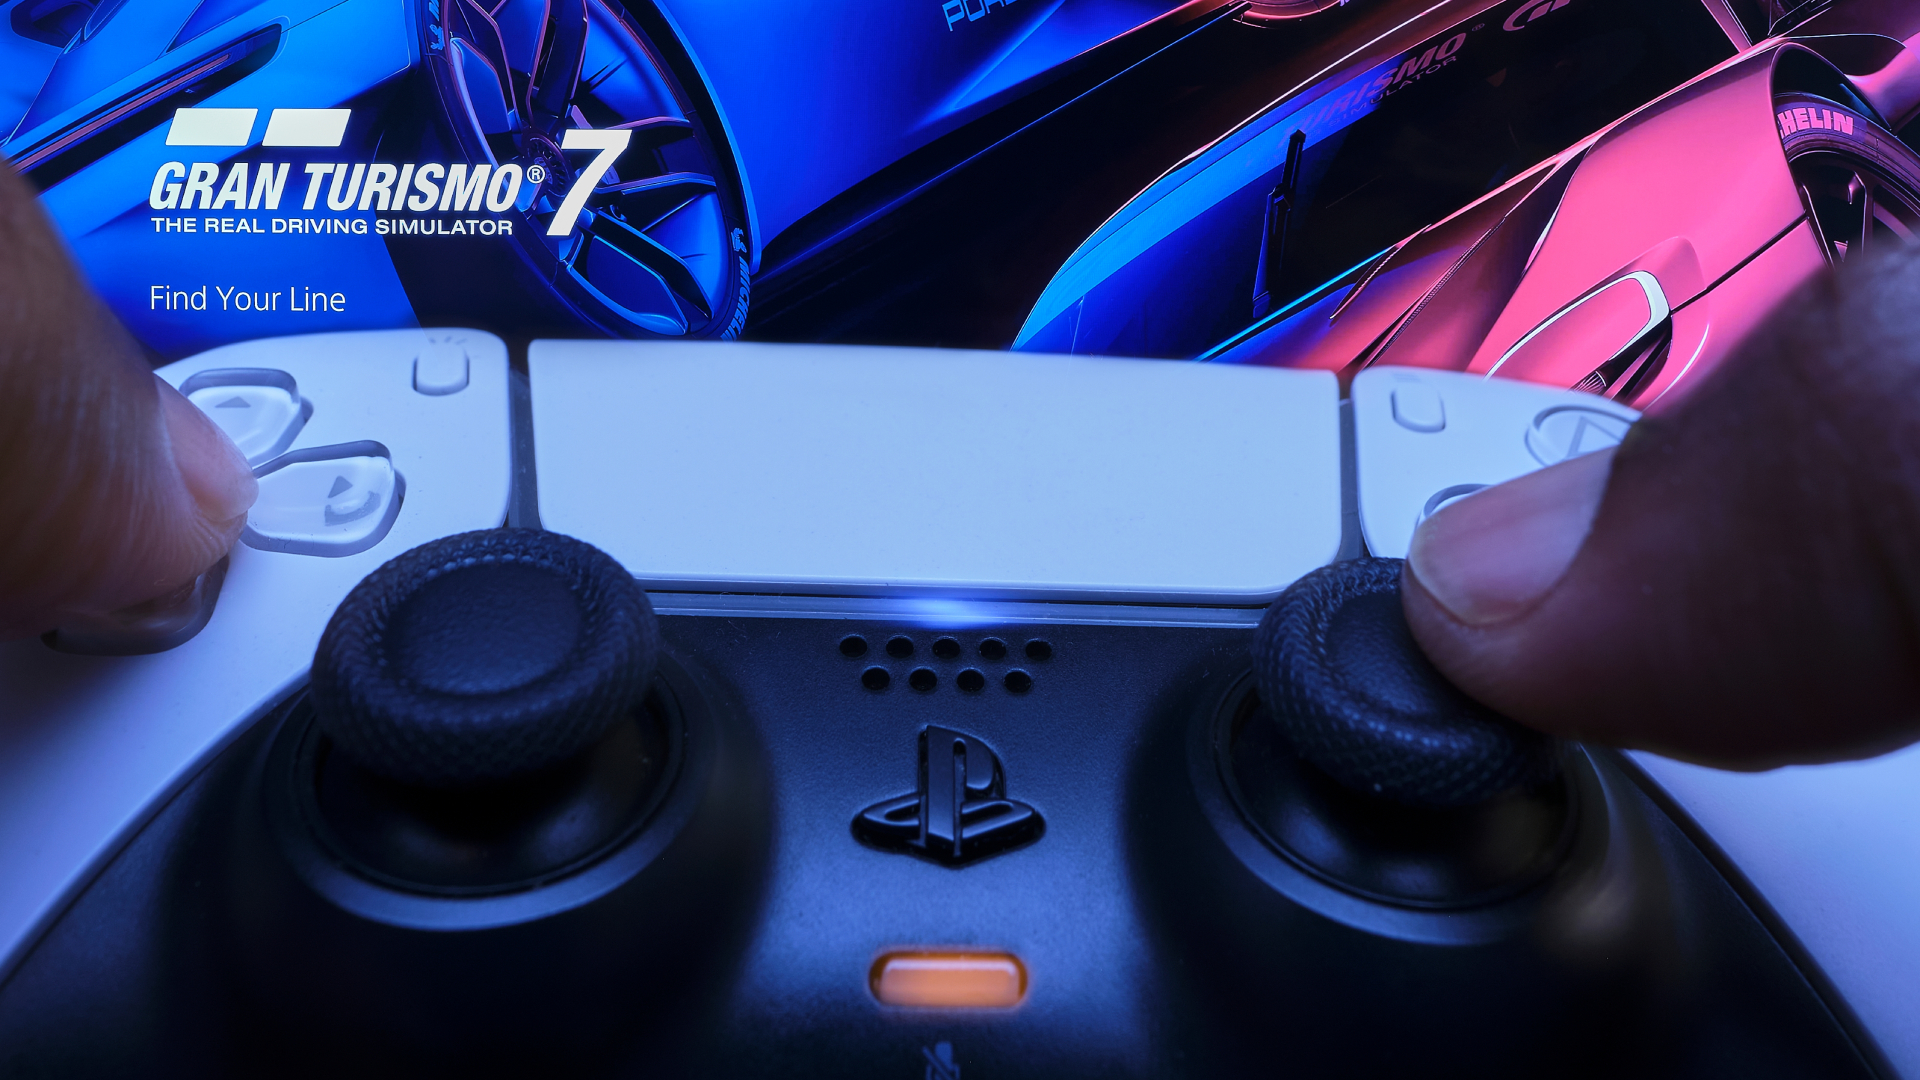 PS5 DualSense controller pointed at a TV displaying Gran Turismo 7 dashboard